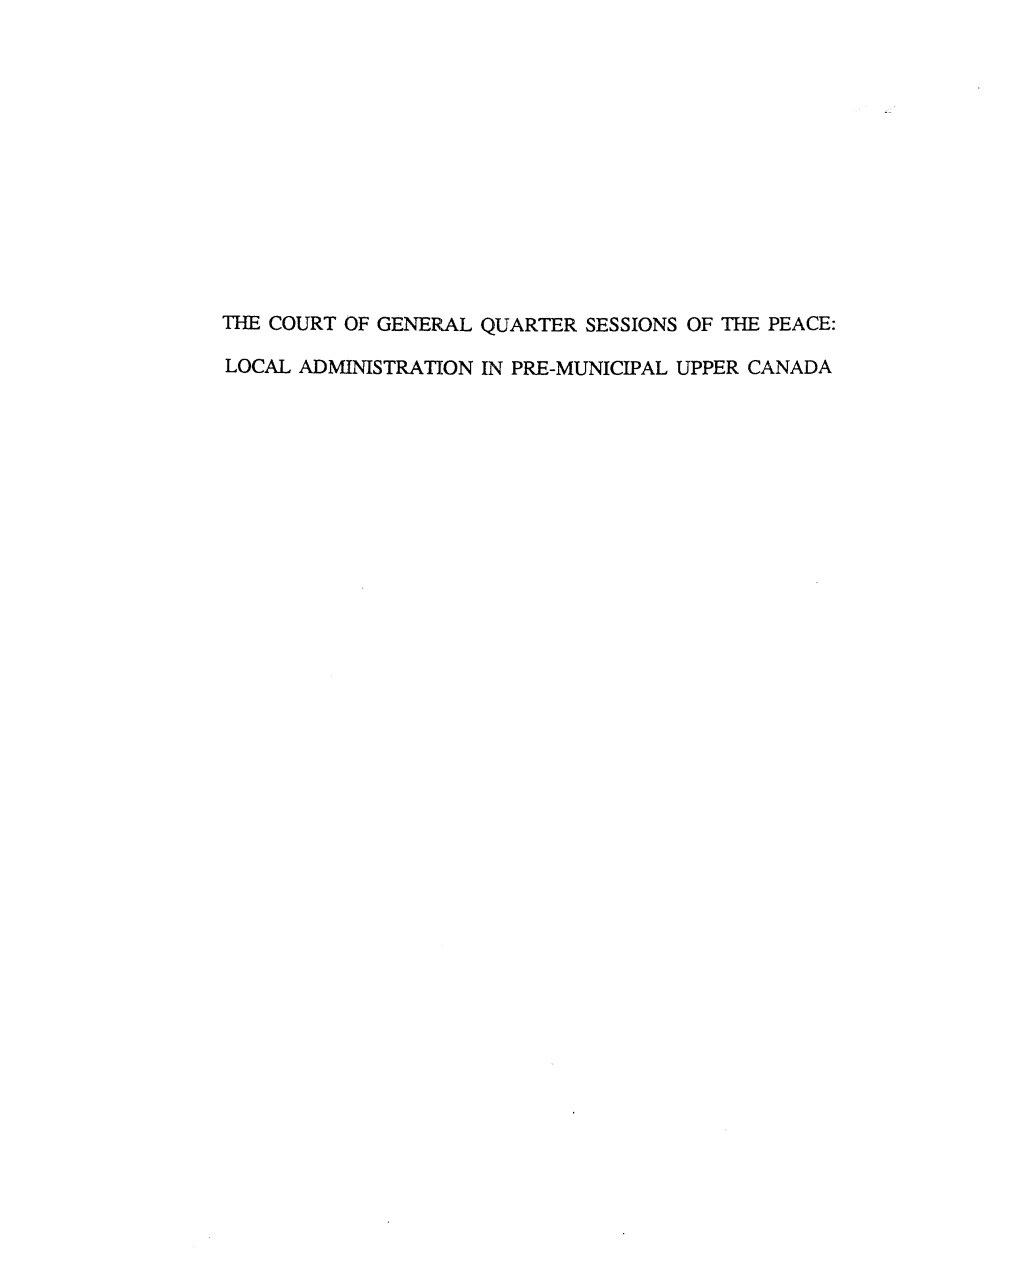 The Court of General Quarter Sessions of the Peace